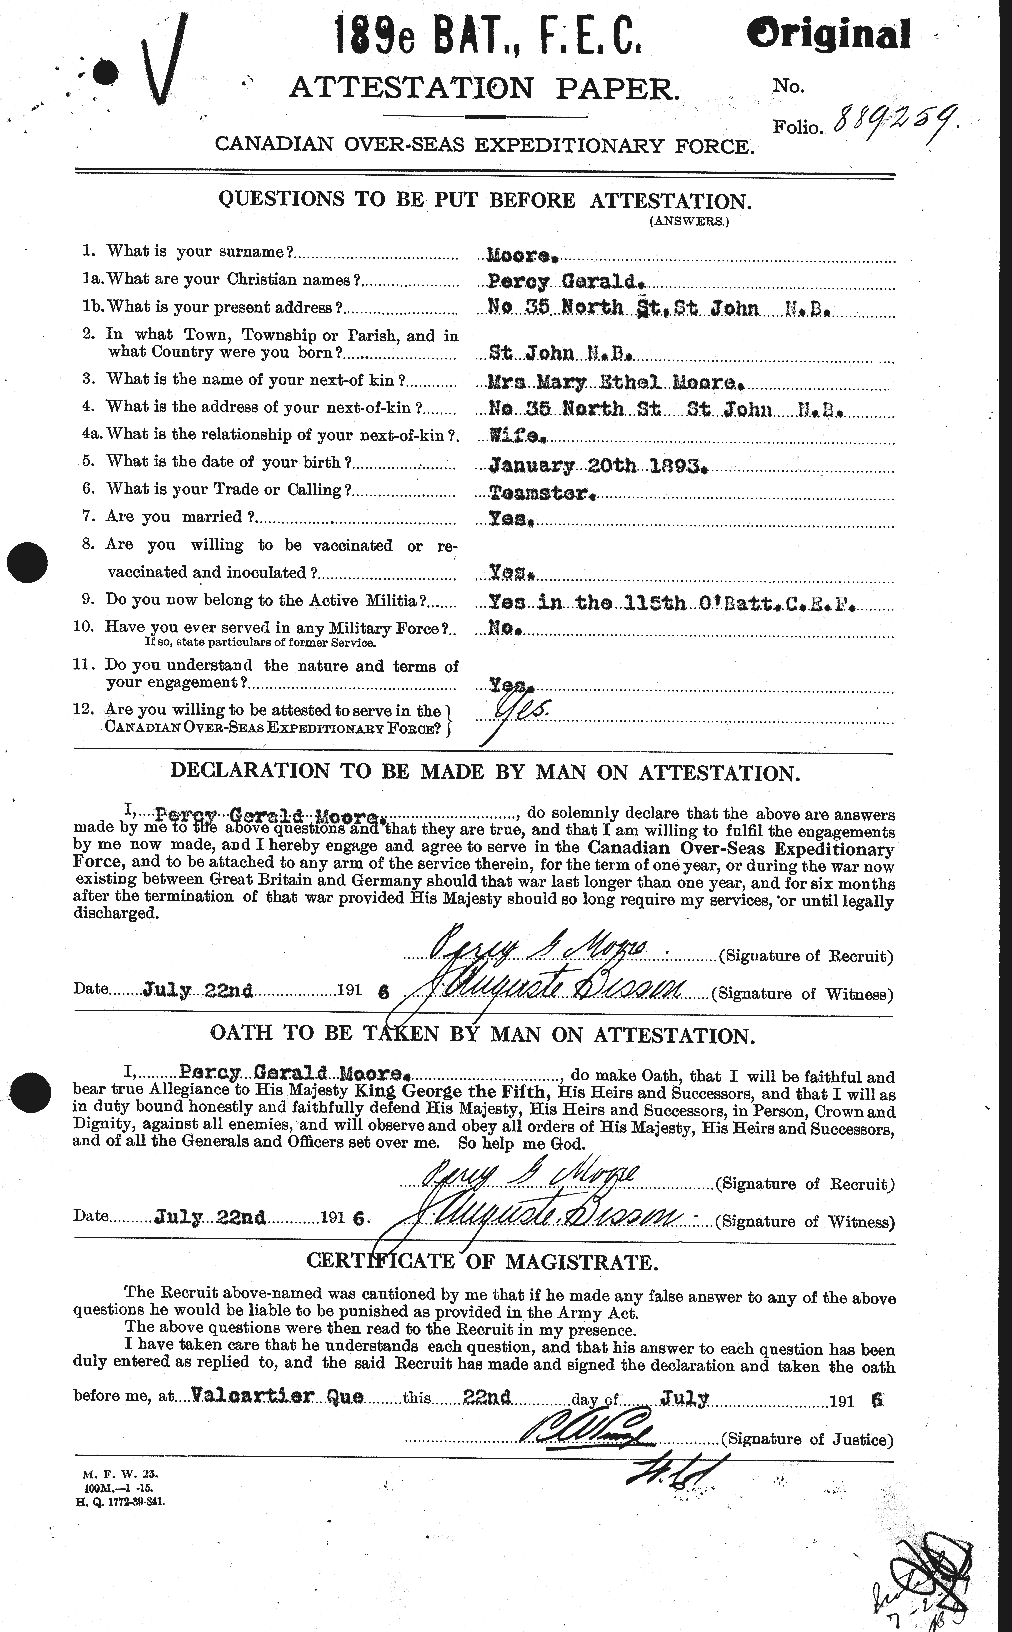 Personnel Records of the First World War - CEF 503486a